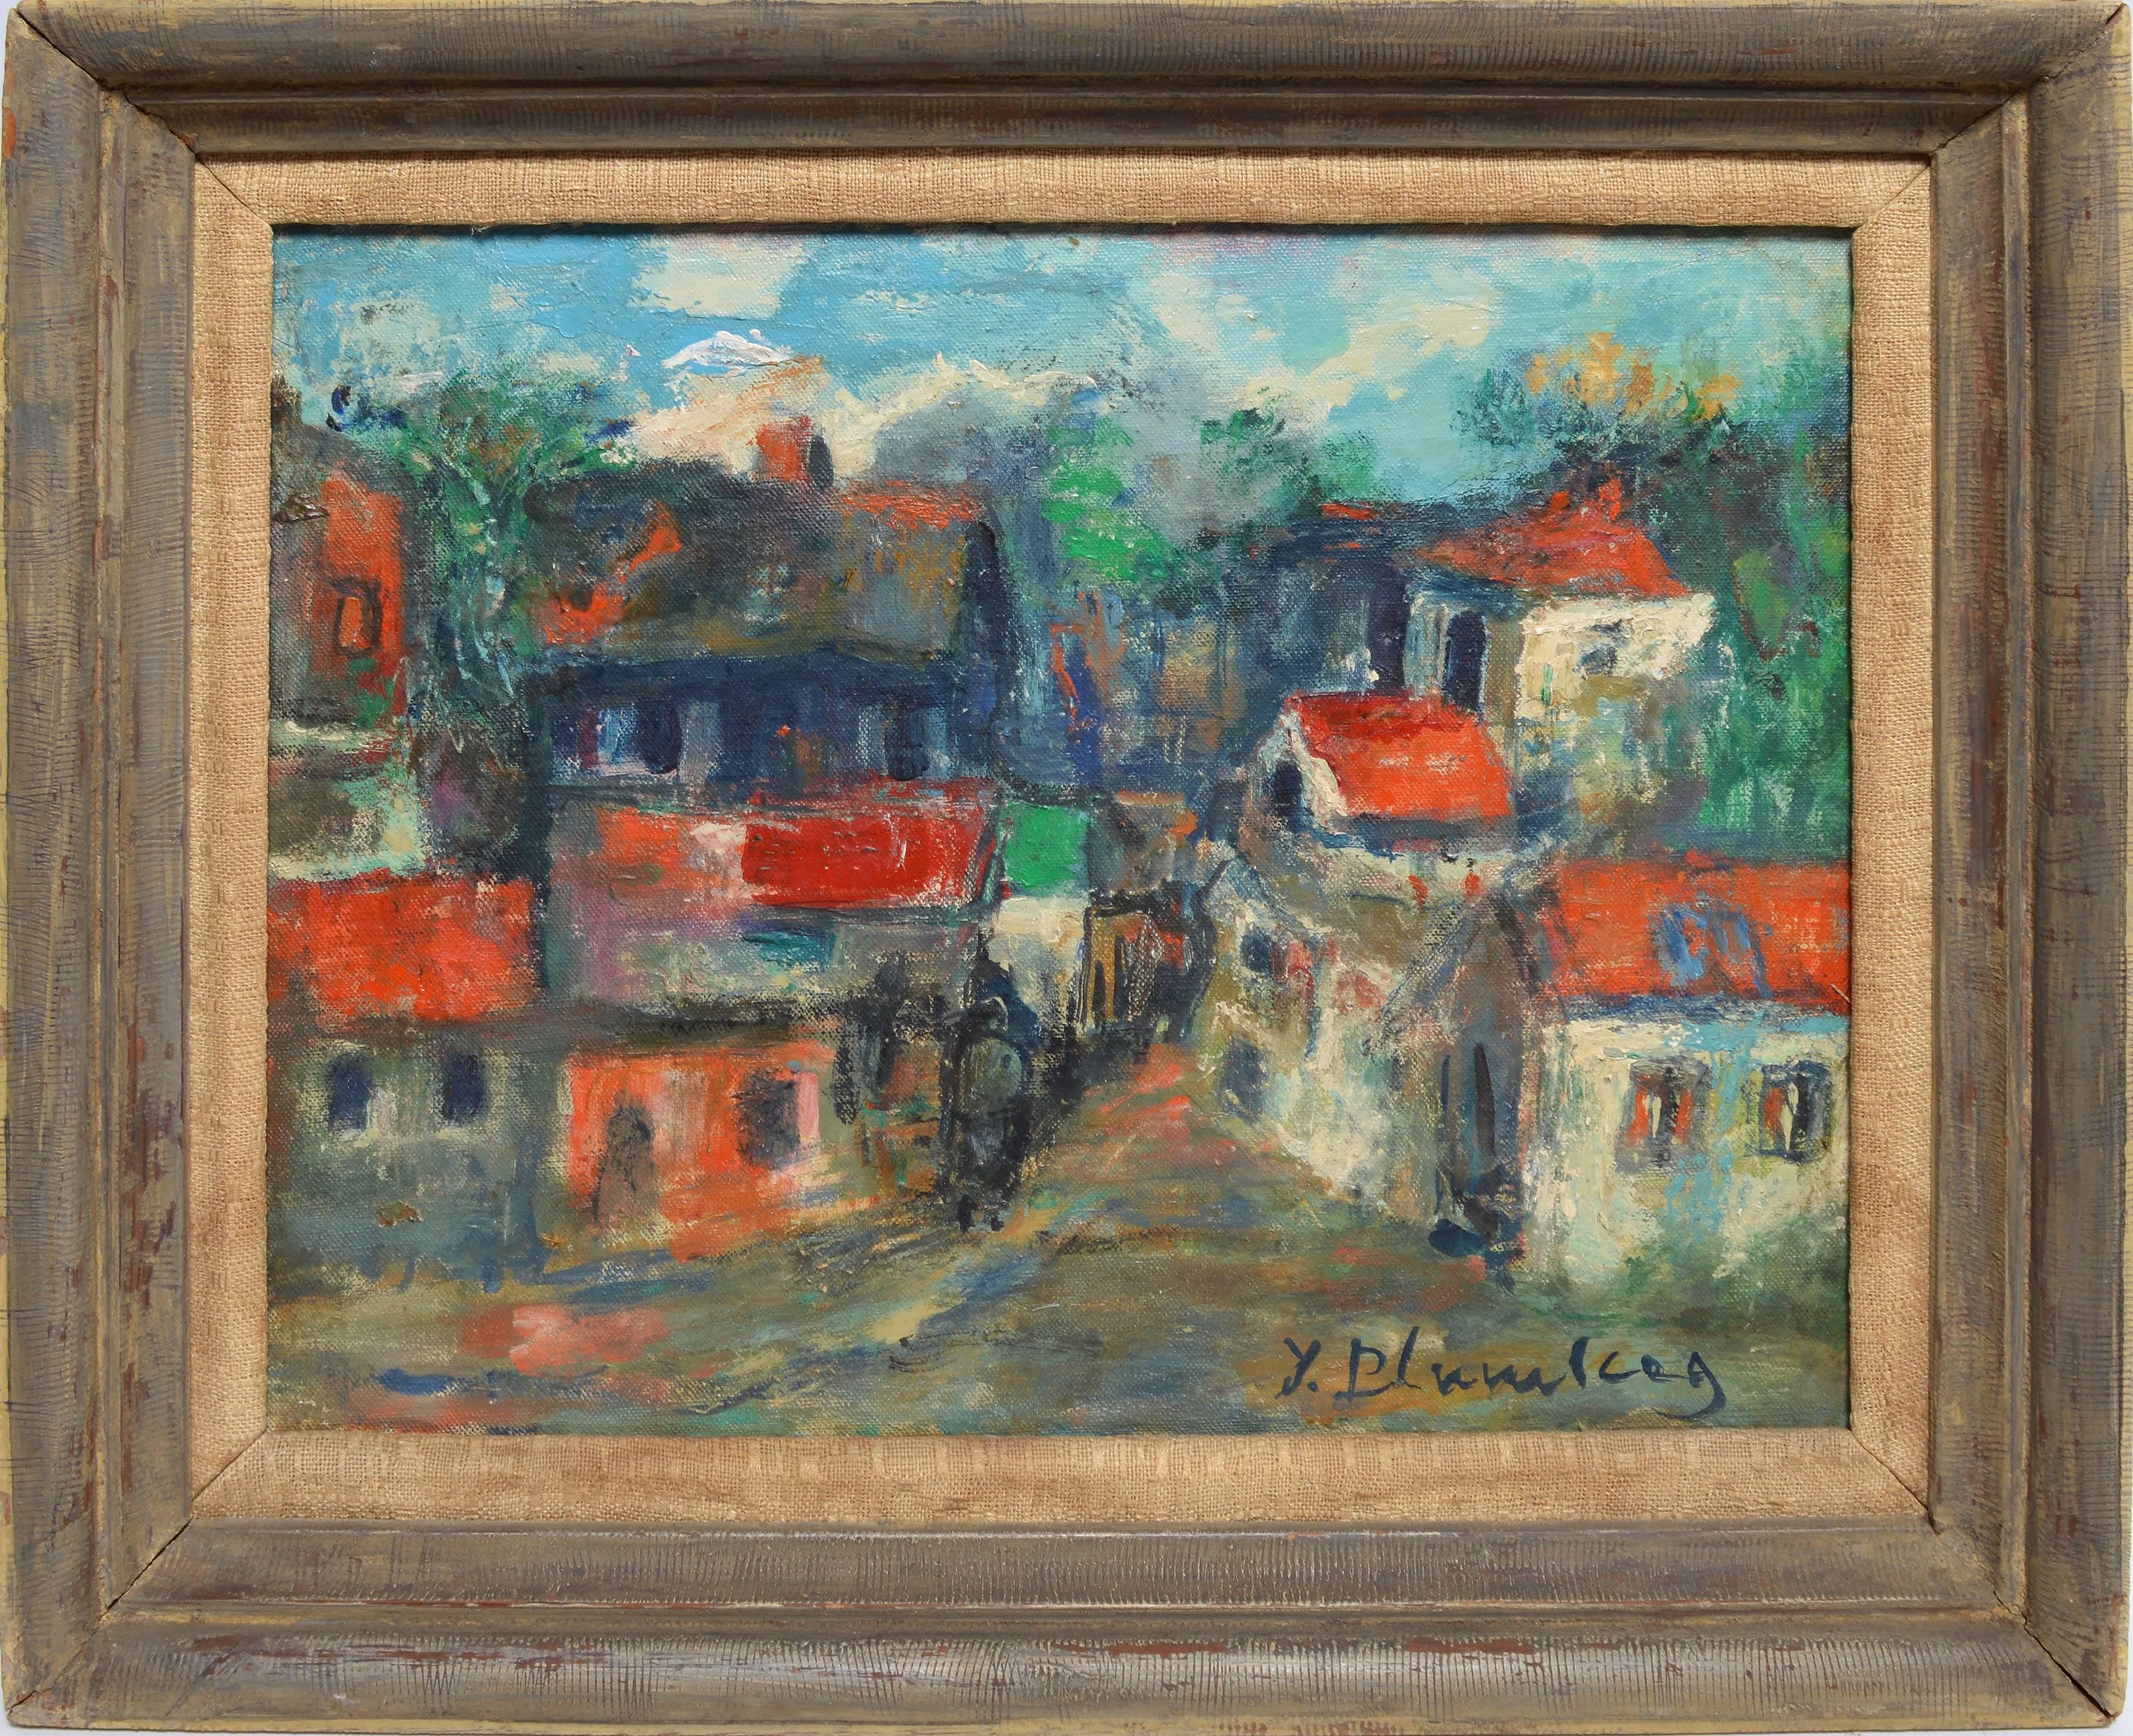 Modernist style view of a French town by Yuli Blumberg  (1894 - 1964).  Oil on canvas, circa 1930.  Signed lower right.  Displayed in a grey modernist frame.  Image size, 14"L x 11"H, overall 17"L x 14"H.